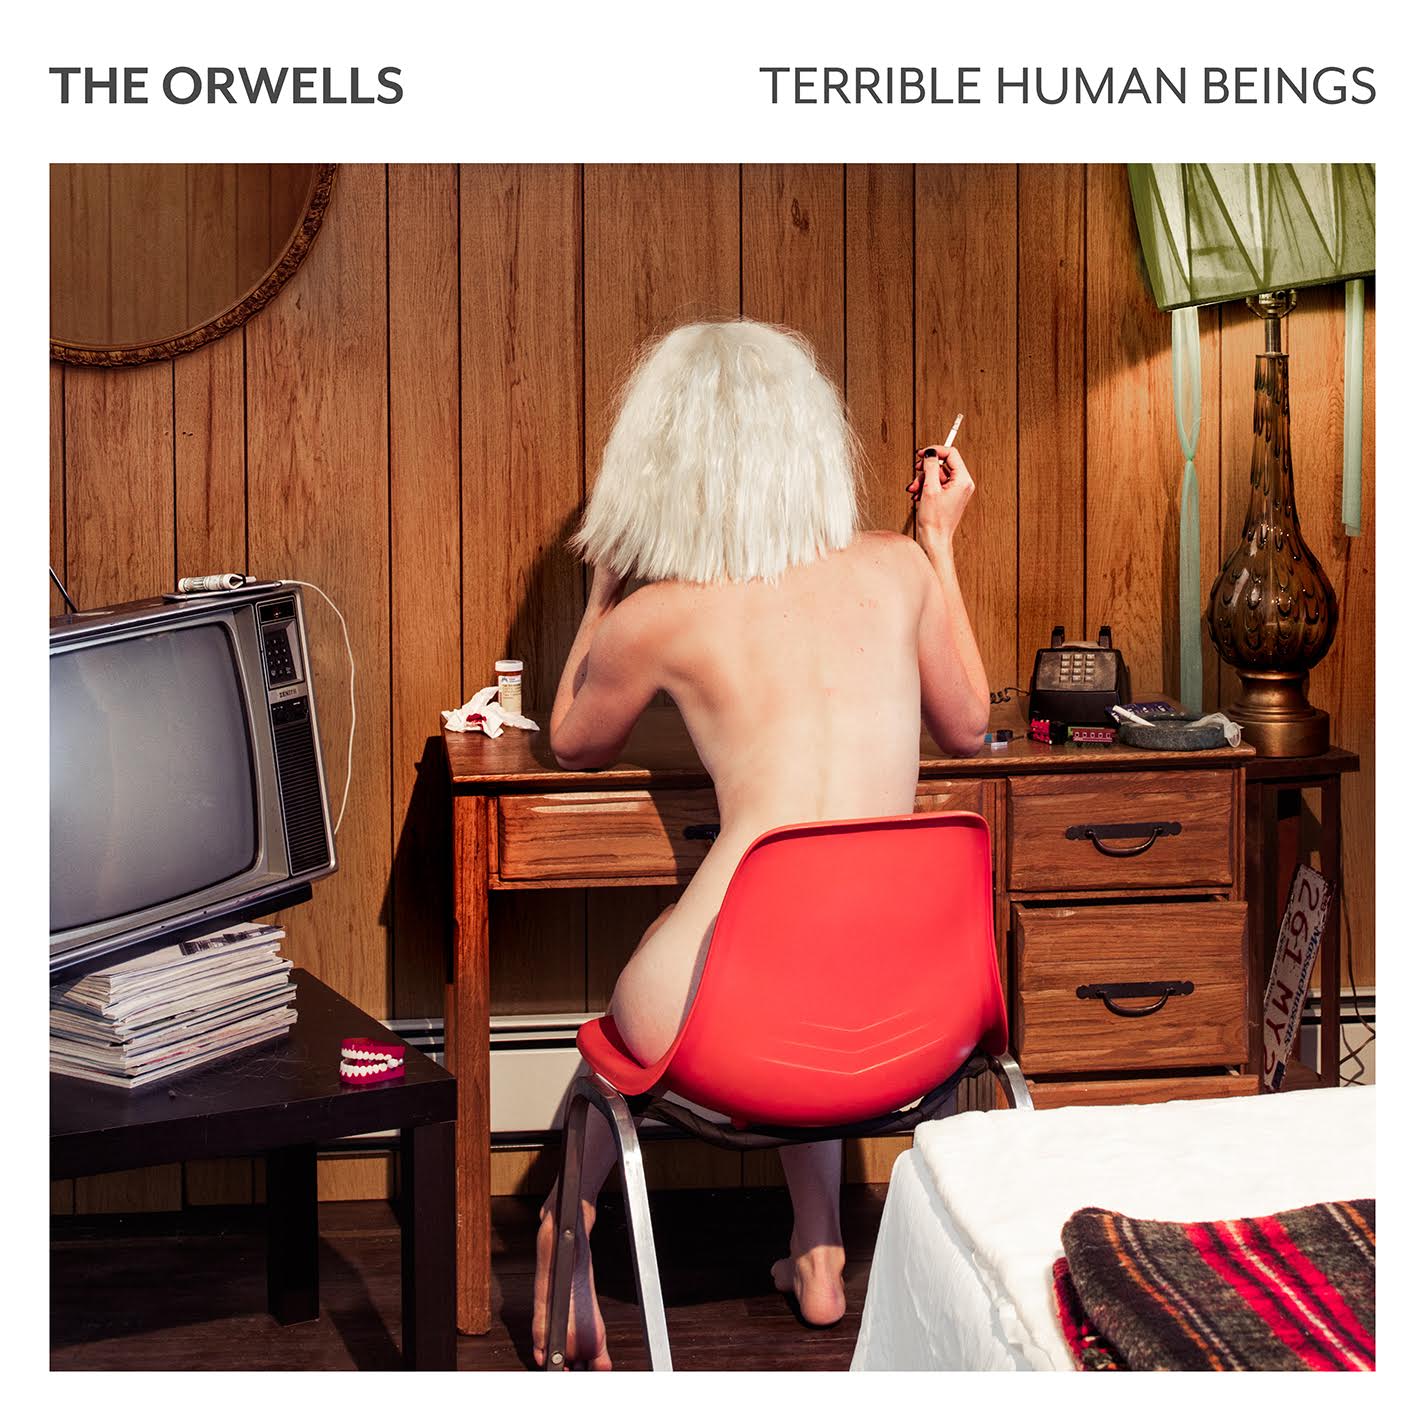 The Orwells Are Moving Past Growing Pains on <em>Terrible Human Beings</em>” title=”unnamed-1″ data-original-id=”213719″ data-adjusted-id=”213719″ class=”sm_size_full_width sm_alignment_center ” /></p>
<p>The 13-track collection finds the band trying out some new territory, focusing a little less on the danceable, buoyant guitar rhythms of their first two albums to make room for “weird drum-loop experimentations, a lot of backward stuff, and different vocal techniques,” according to O’Keefe.</p>
<p>This time around, the Orwells are fancying themselves craftsmen. Yes, they’re still in their early twenties, but they’re more interested in moving forward than simply getting loused on the same tales of knocking back beers with friends and spending wild nights with strangers.</p>
<p>“I have a slightly different view in the short span of a year or two,” Cuomo says. “It pushes [you] more as an artist … You can’t get away with as much—and I don’t think we want to, either.”</p>
</p></p>  </div>
  <div class=